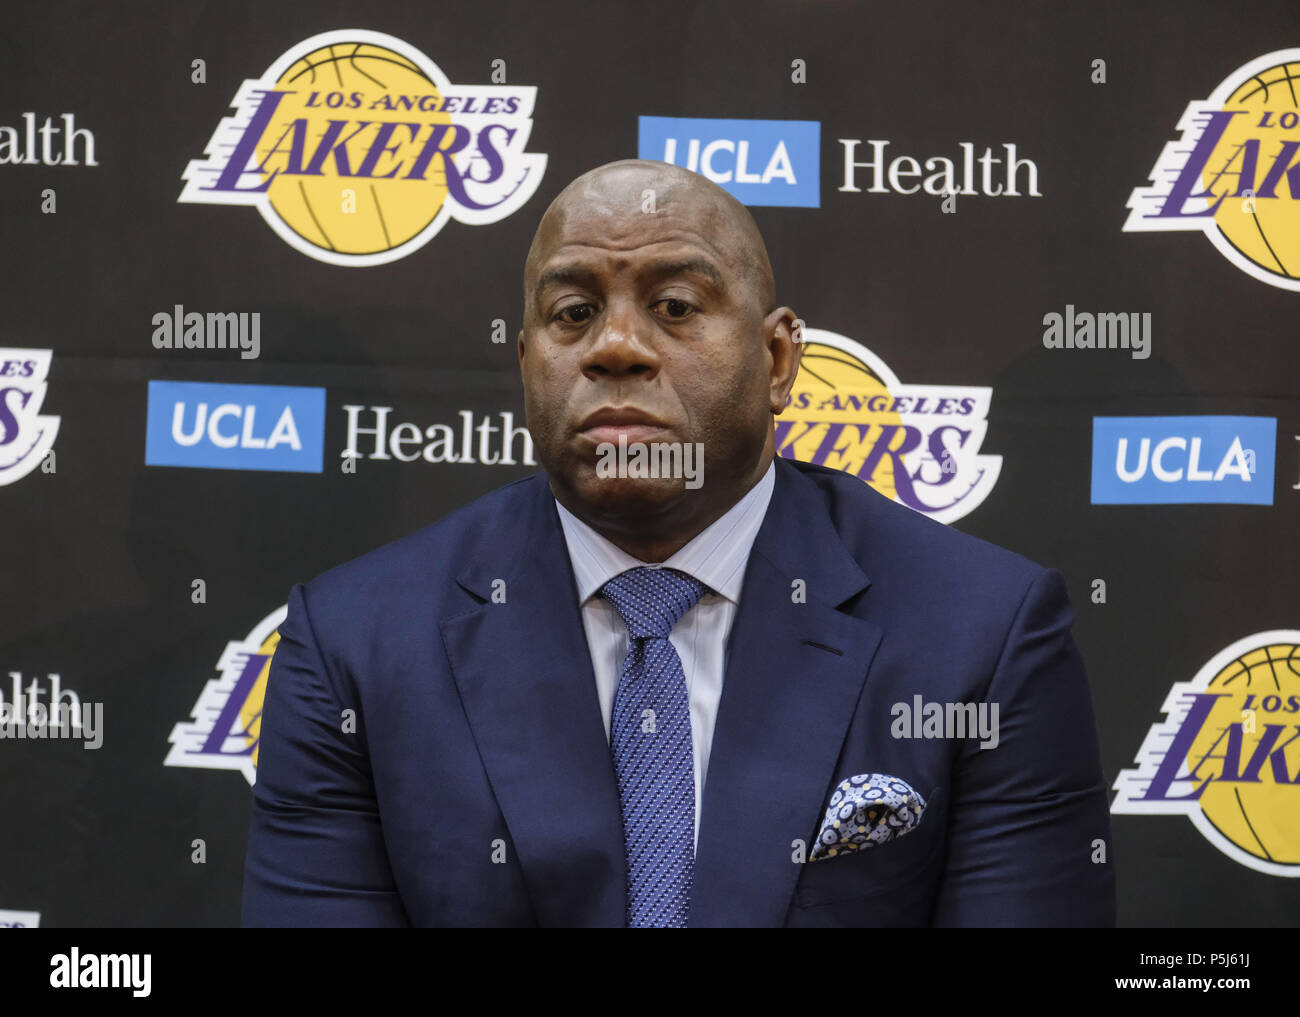 Los Angeles, California, USA. 26th June, 2018. Los Angeles Lakers president of basketball operations, Earvin ''Magic'' Johnson at an introductory press conference in Los Angeles, Tuesday, June 26, 2018. The Lakers introduce two new draft players, Moritz Wagner, originally from Germany, the 25th pick in the 2018 NBA Draft and guard Sviatoslav Mykhailiuk, originally from Ukraine. Credit: Ringo Chiu/ZUMA Wire/Alamy Live News Stock Photo